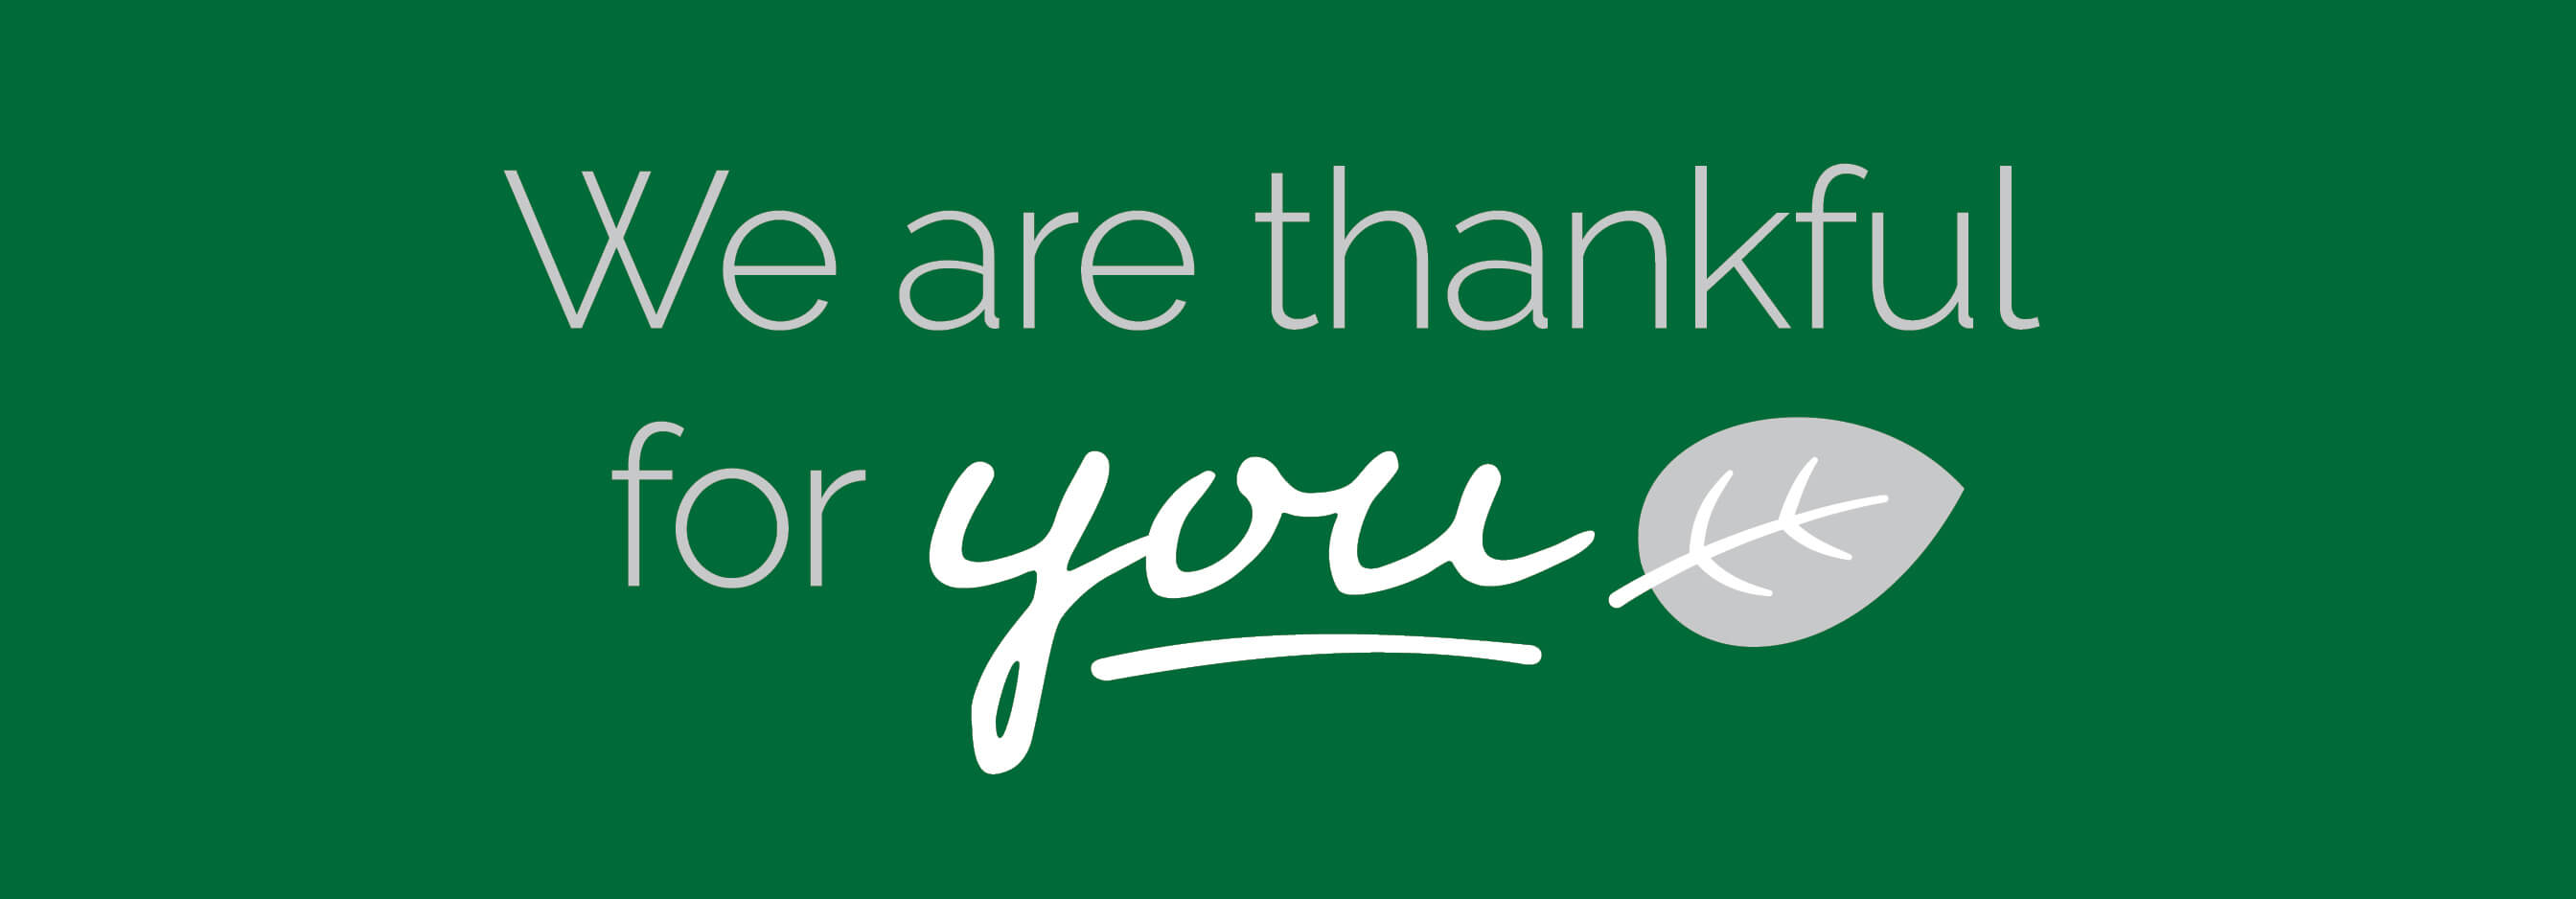 graphic of fall leaves silhouetted on a green background with words over it - We are thankful for you